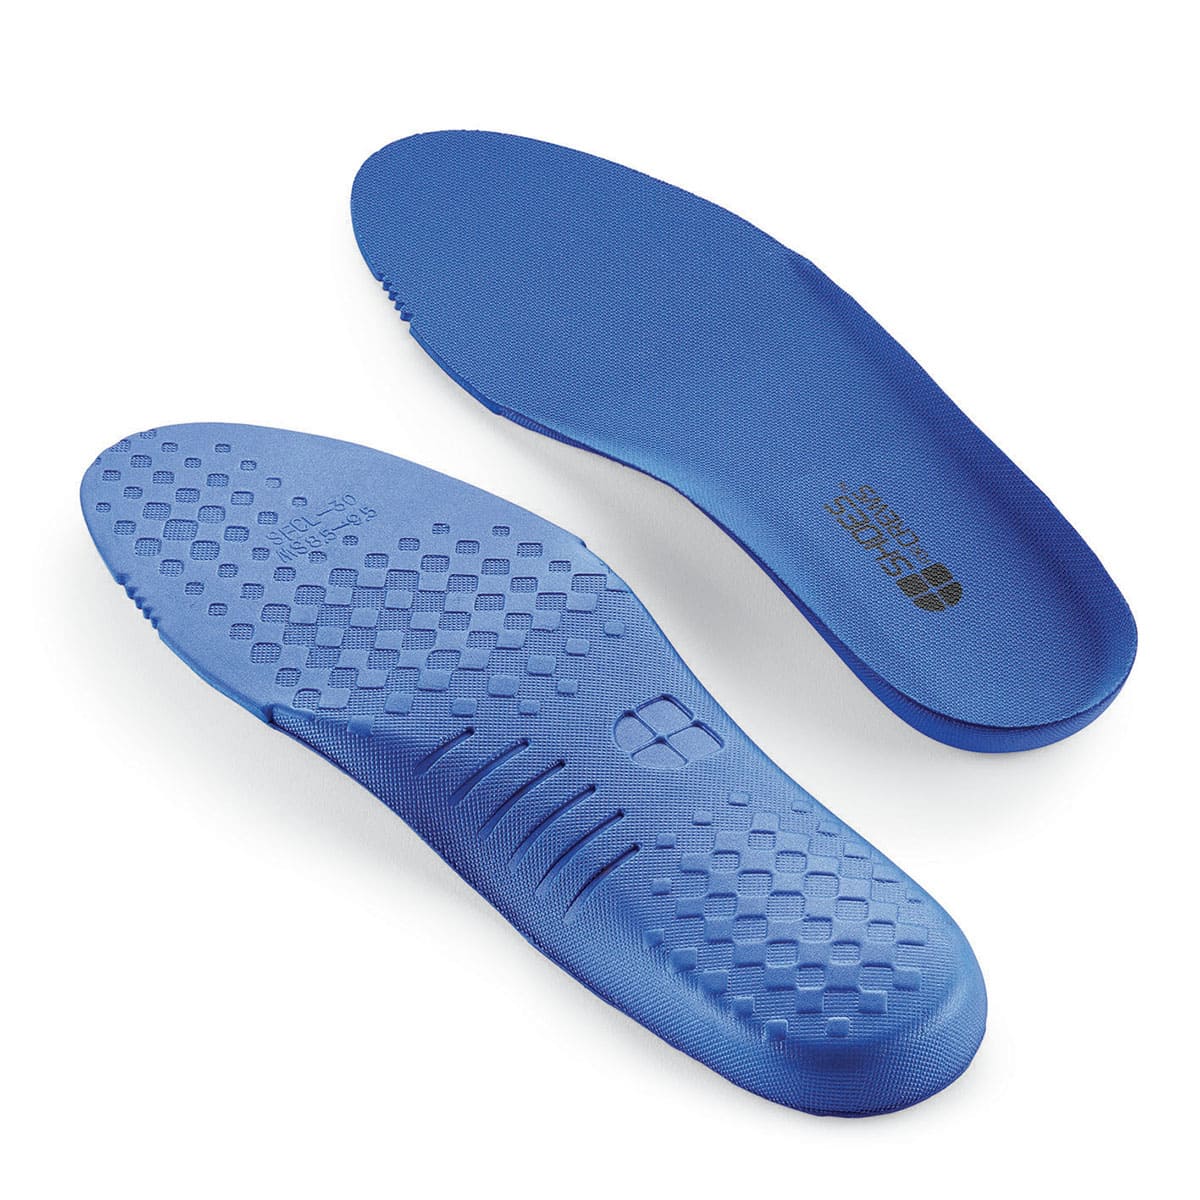 The Shoes For Crews comfort insole is made from durable EVA material and incorporates a cushioned layer and an adaptable arch, seen from above and below at a perpendicular angle.